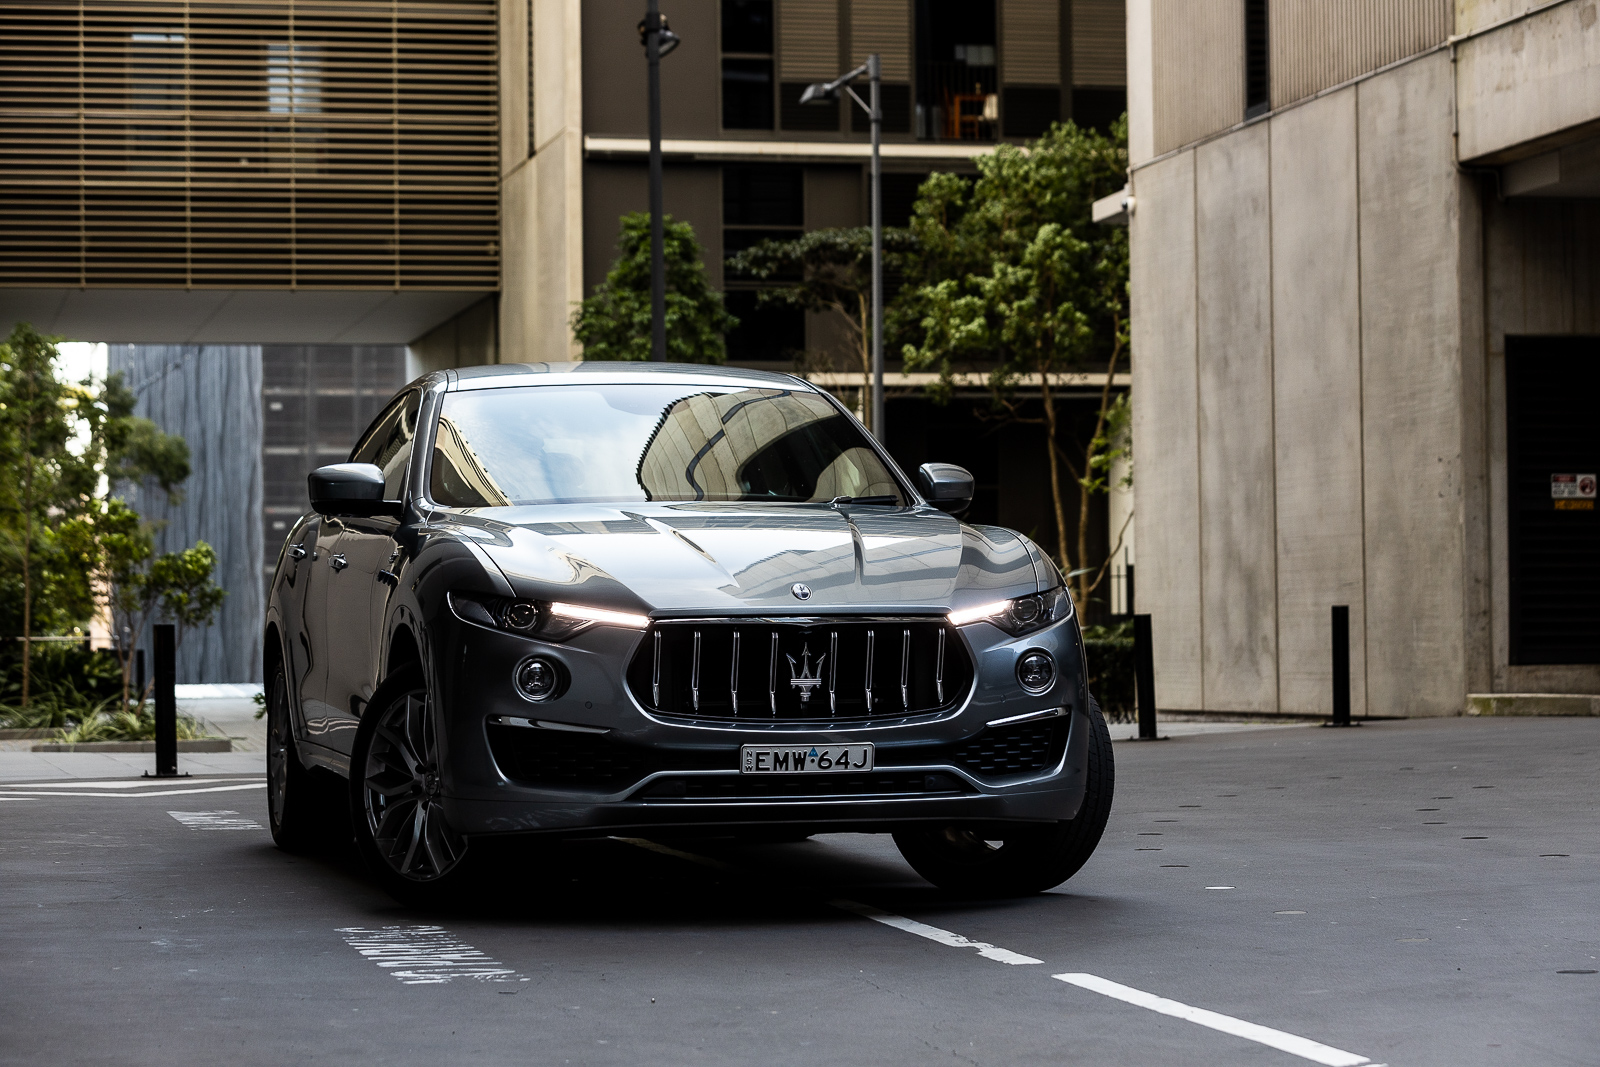 The Levante GT Is Maserati’s First Significant Step Towards An Electrified Future